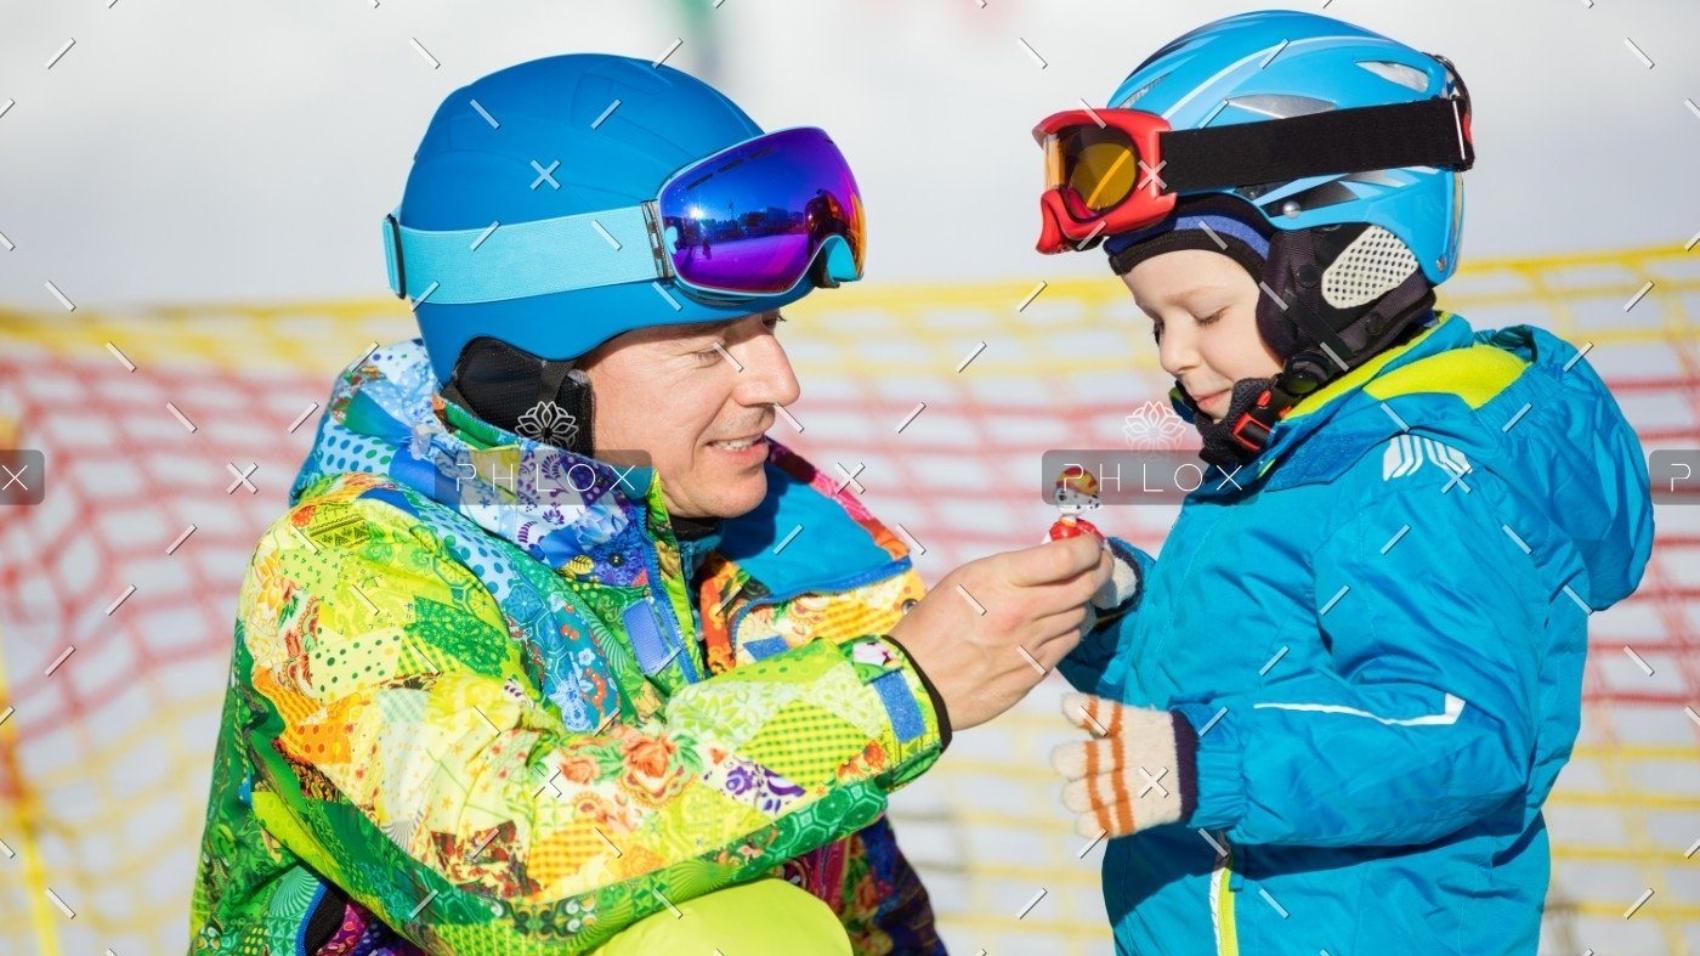 demo-attachment-148-father-and-little-son-in-skiing-outfits-playing-PMSY642